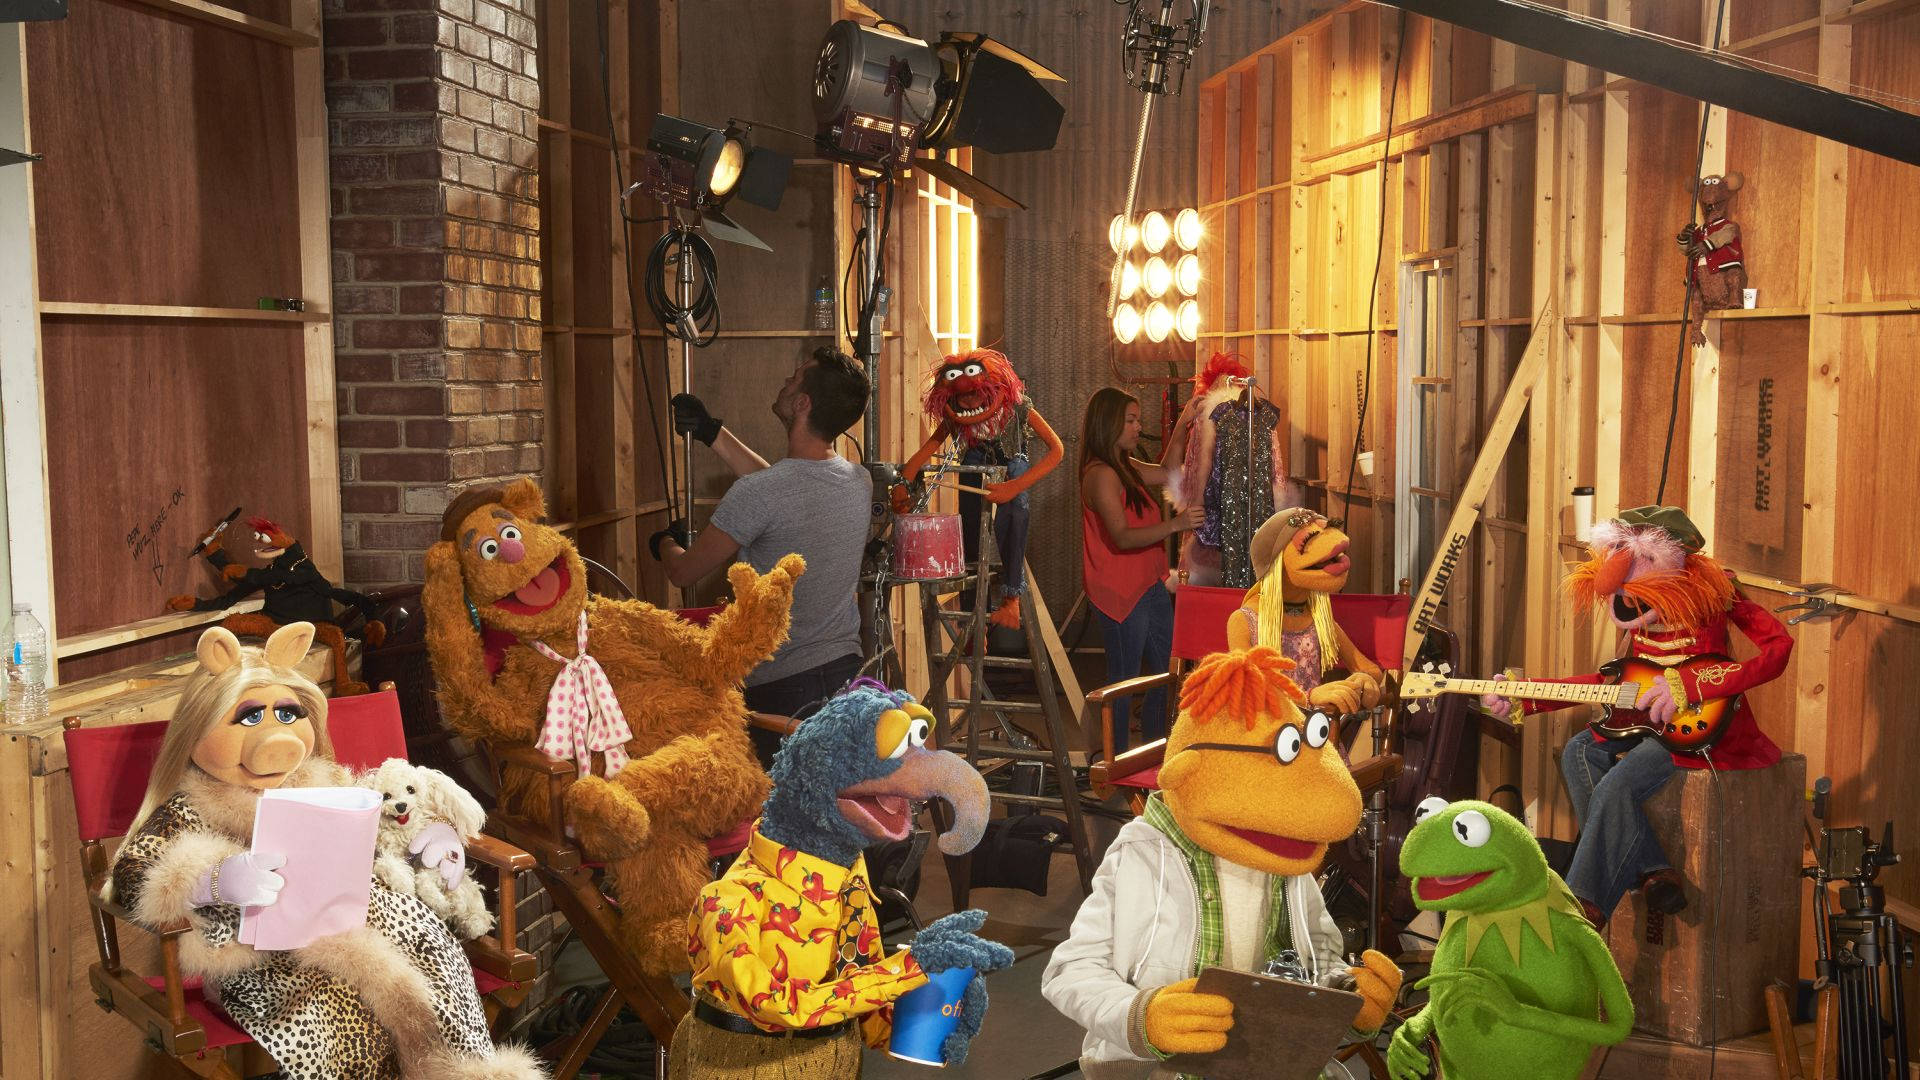 Kermit the Frog with The Muppets Backstage Wallpaper